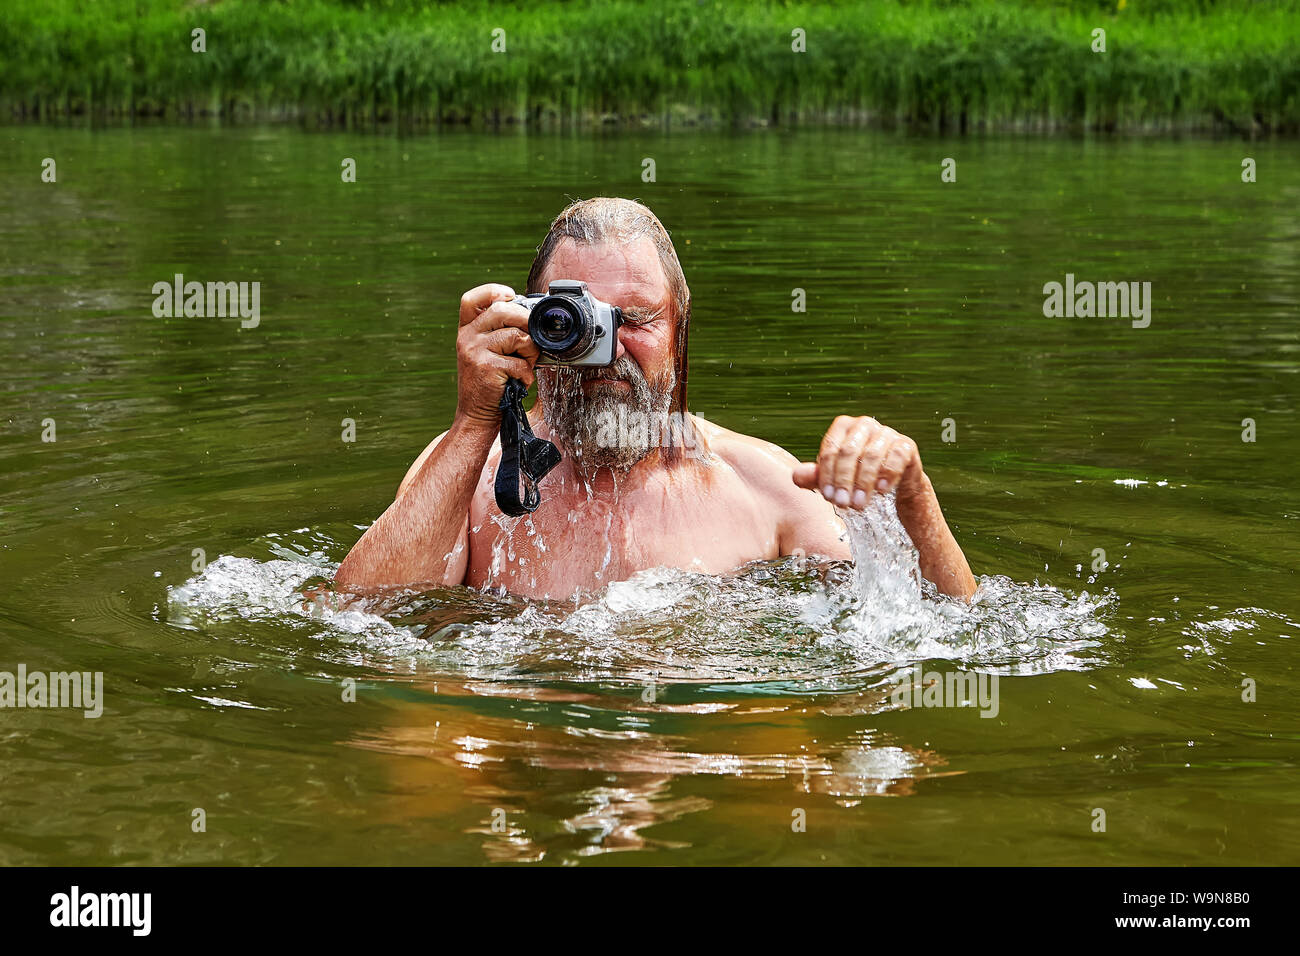 Wet mature bearded man is standing in water and taking pictures by digital camera. Stock Photo